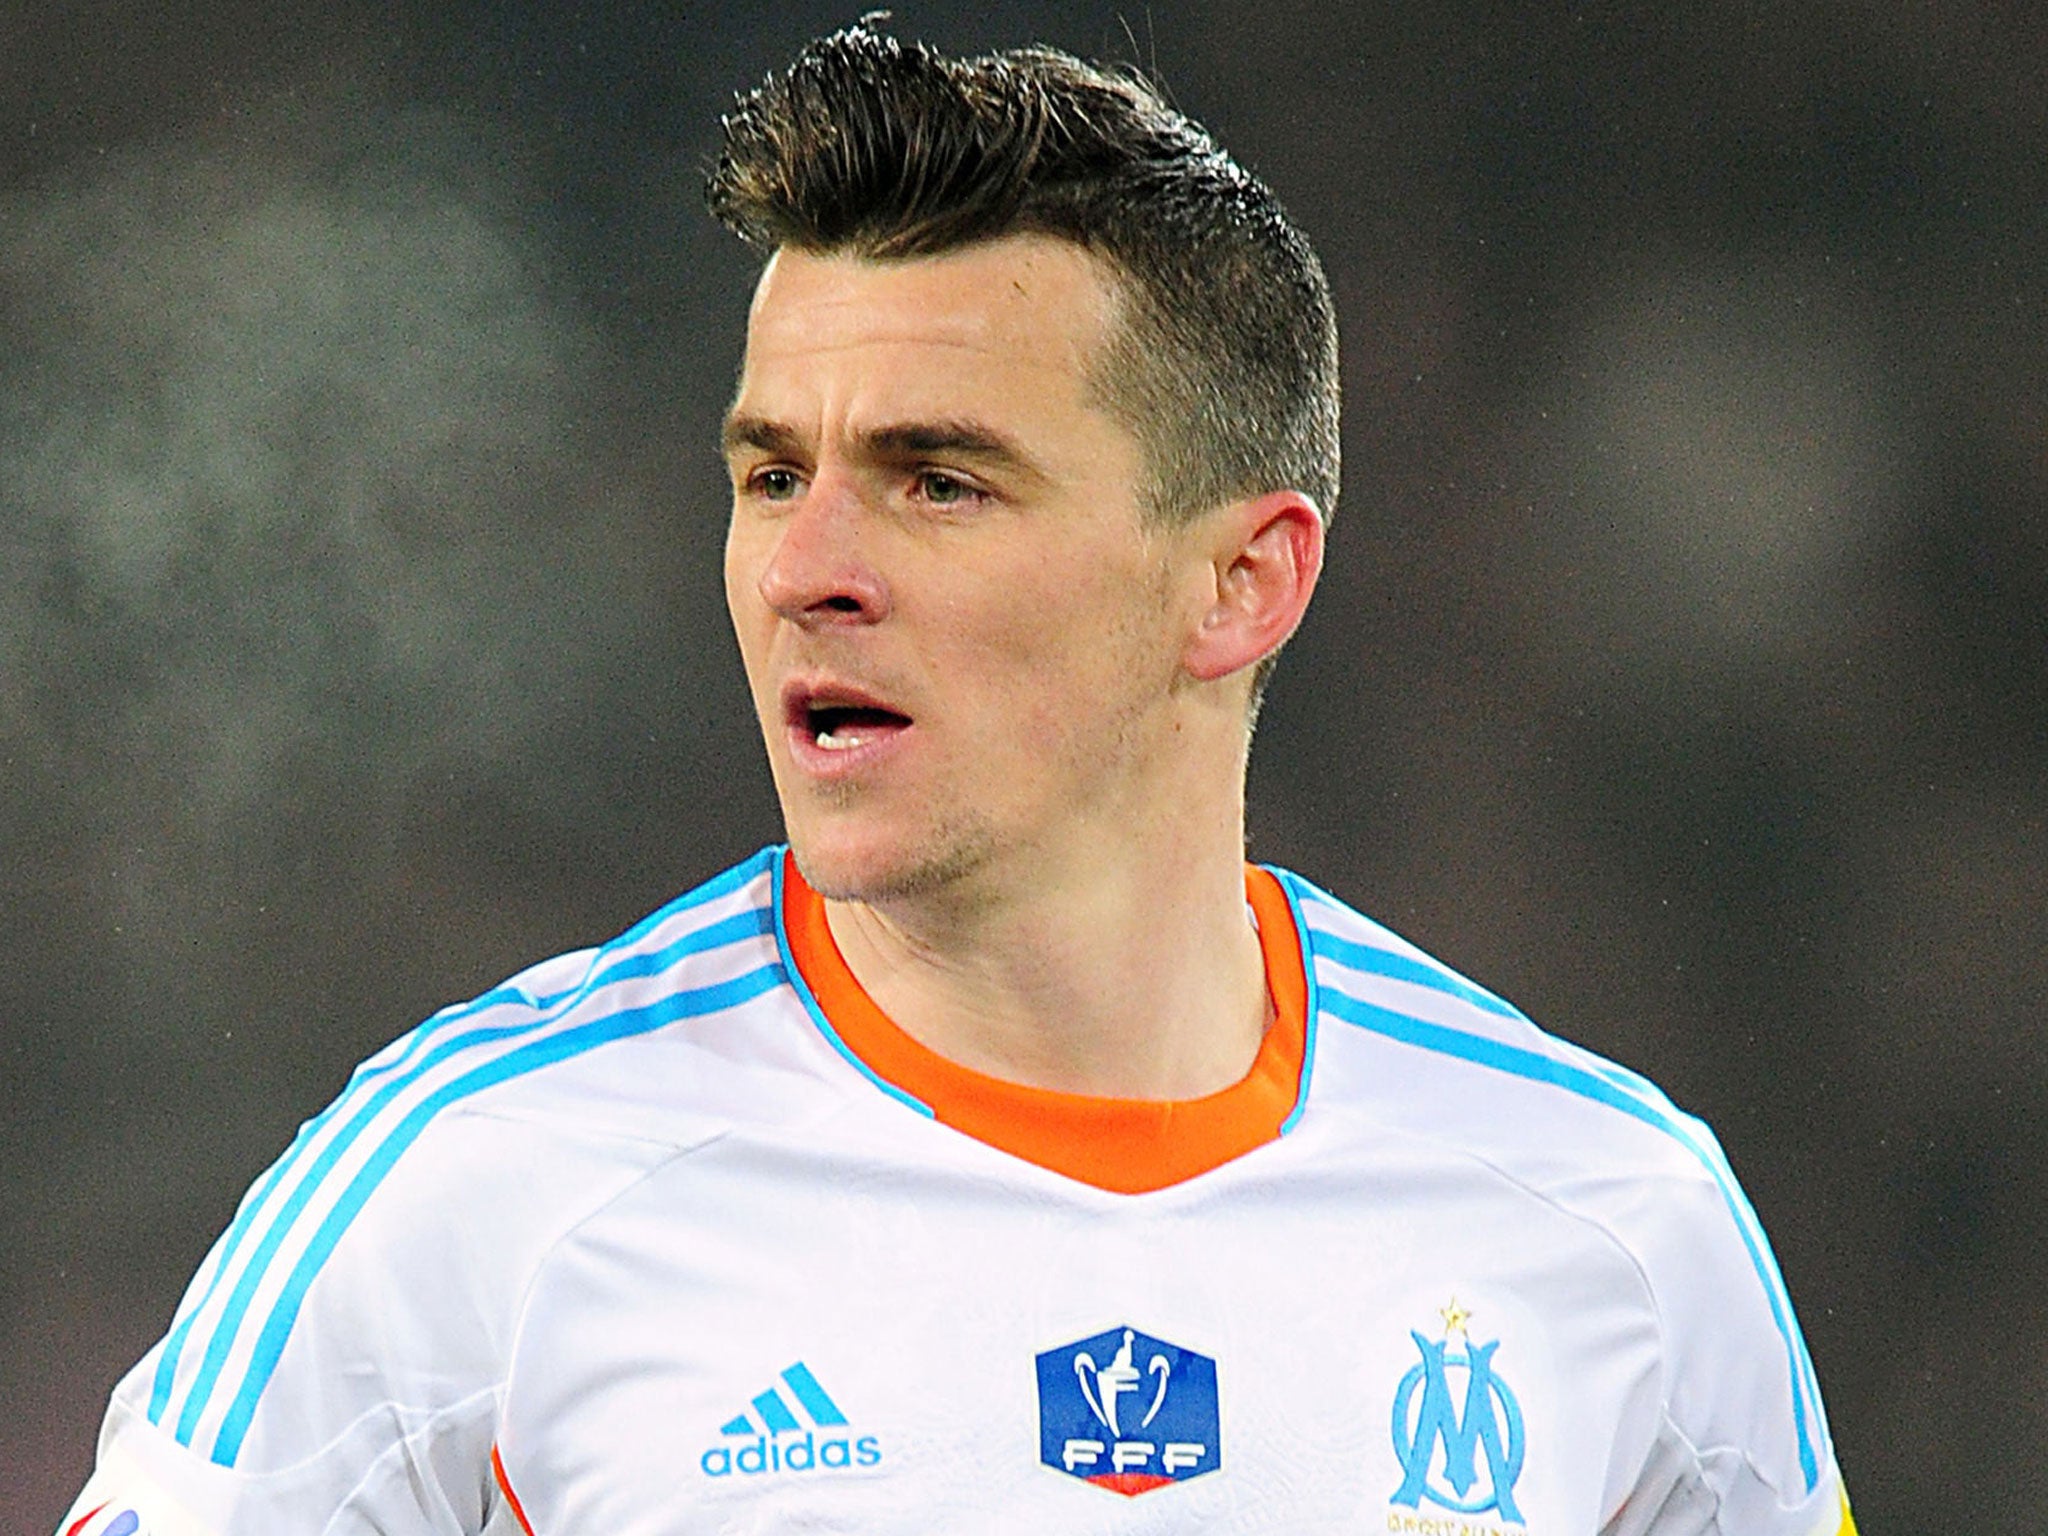 Barton has been summoned after he called Thiago Silva an 'overweight ladyboy' on Twitter